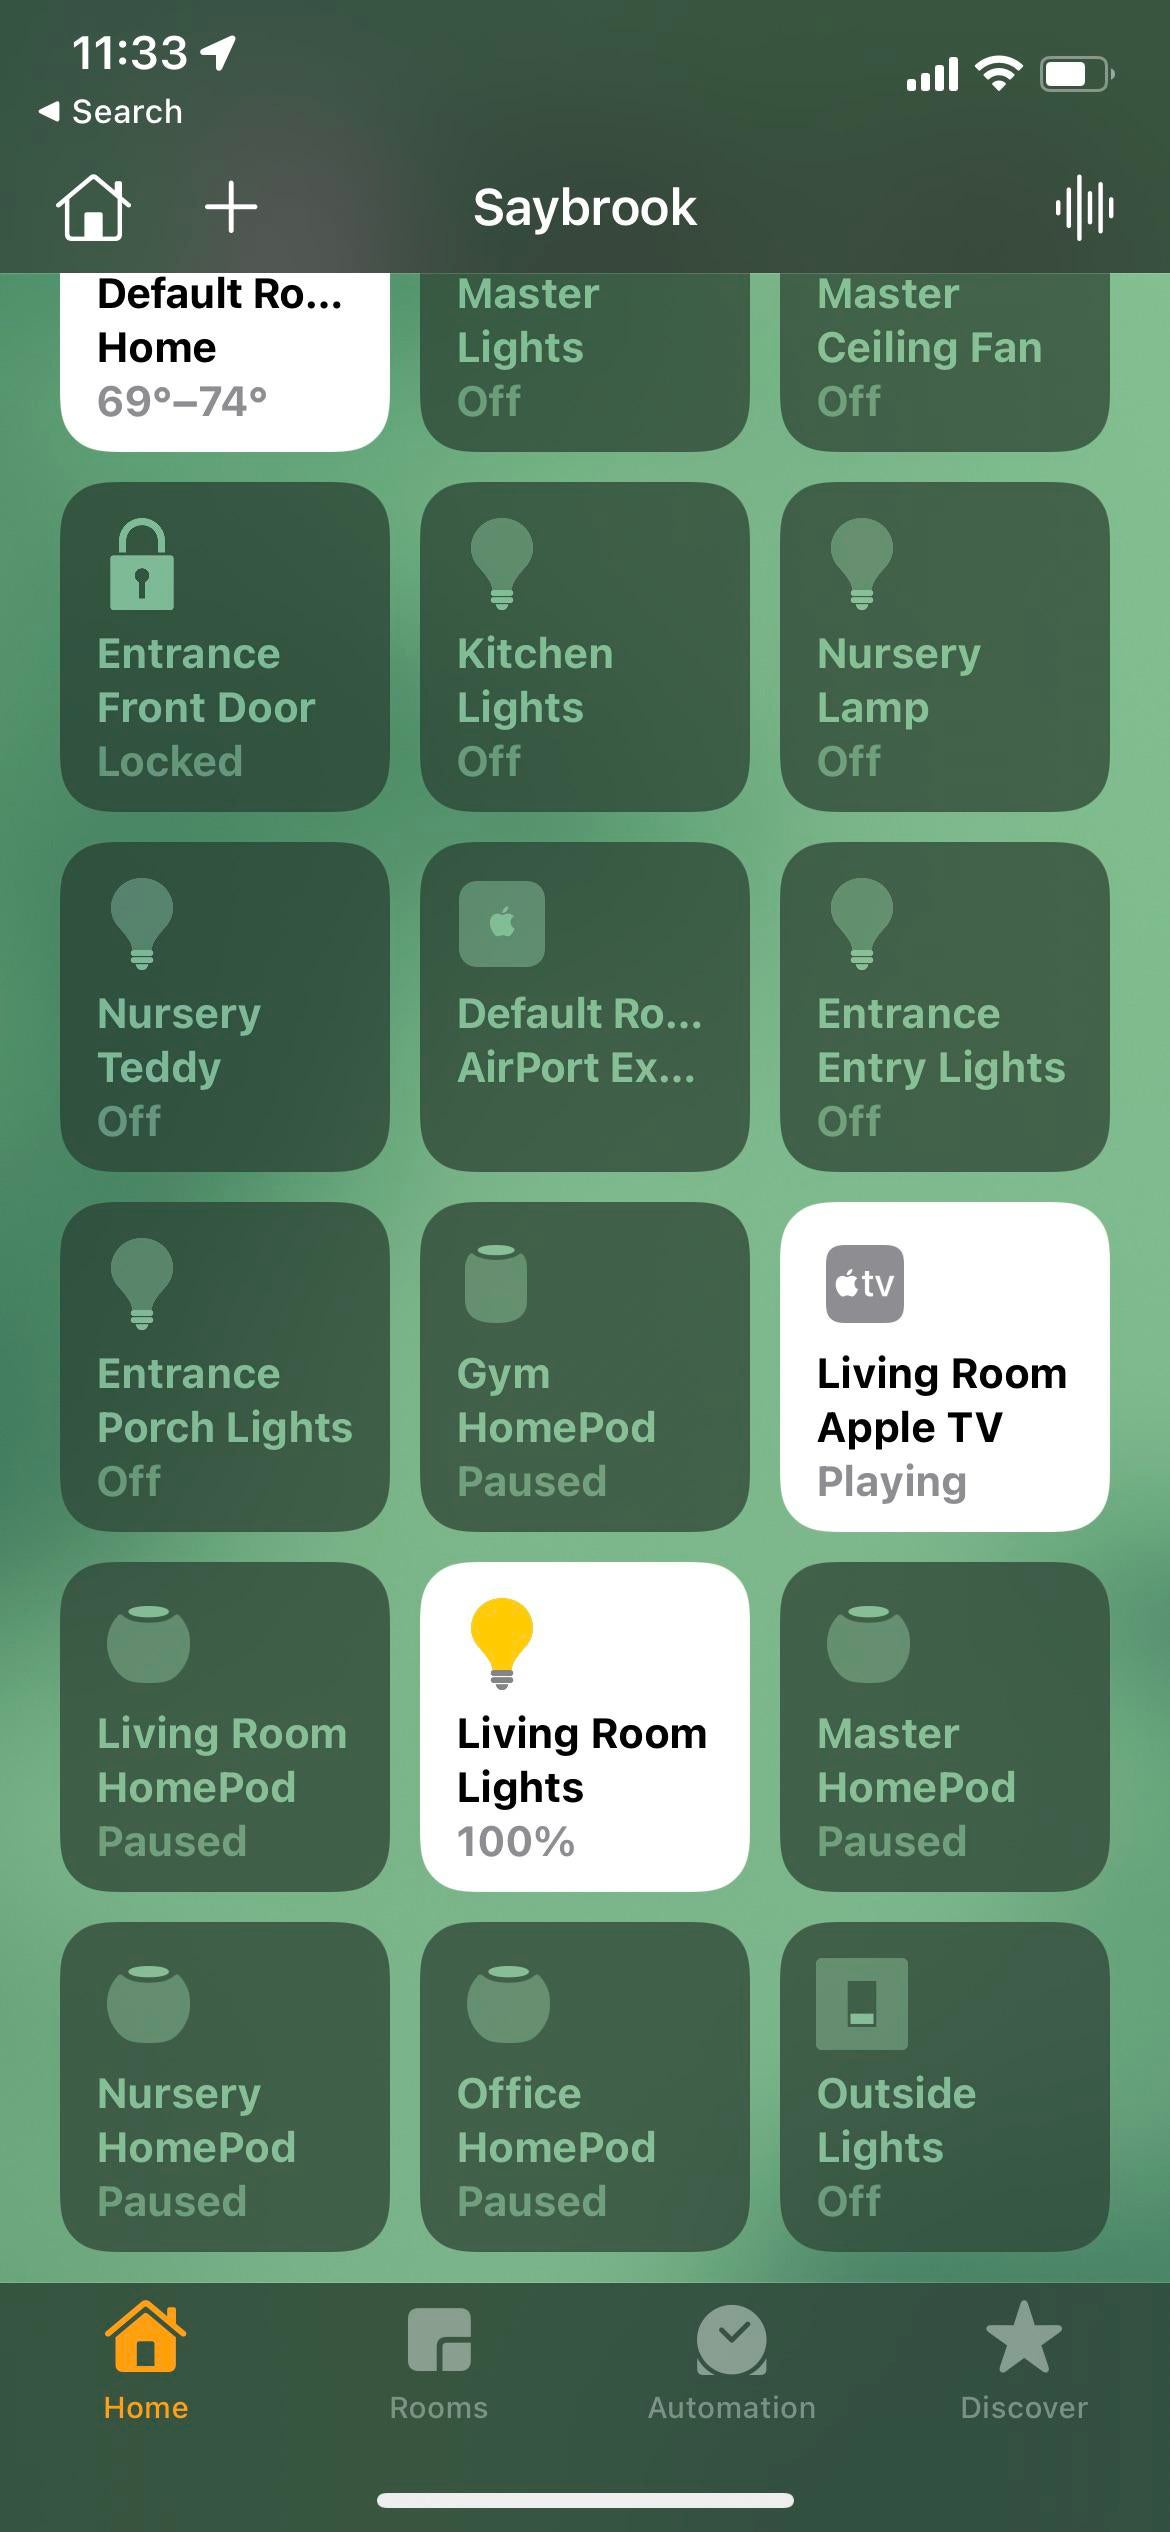 Siri on the living room homepod tells me nothing is